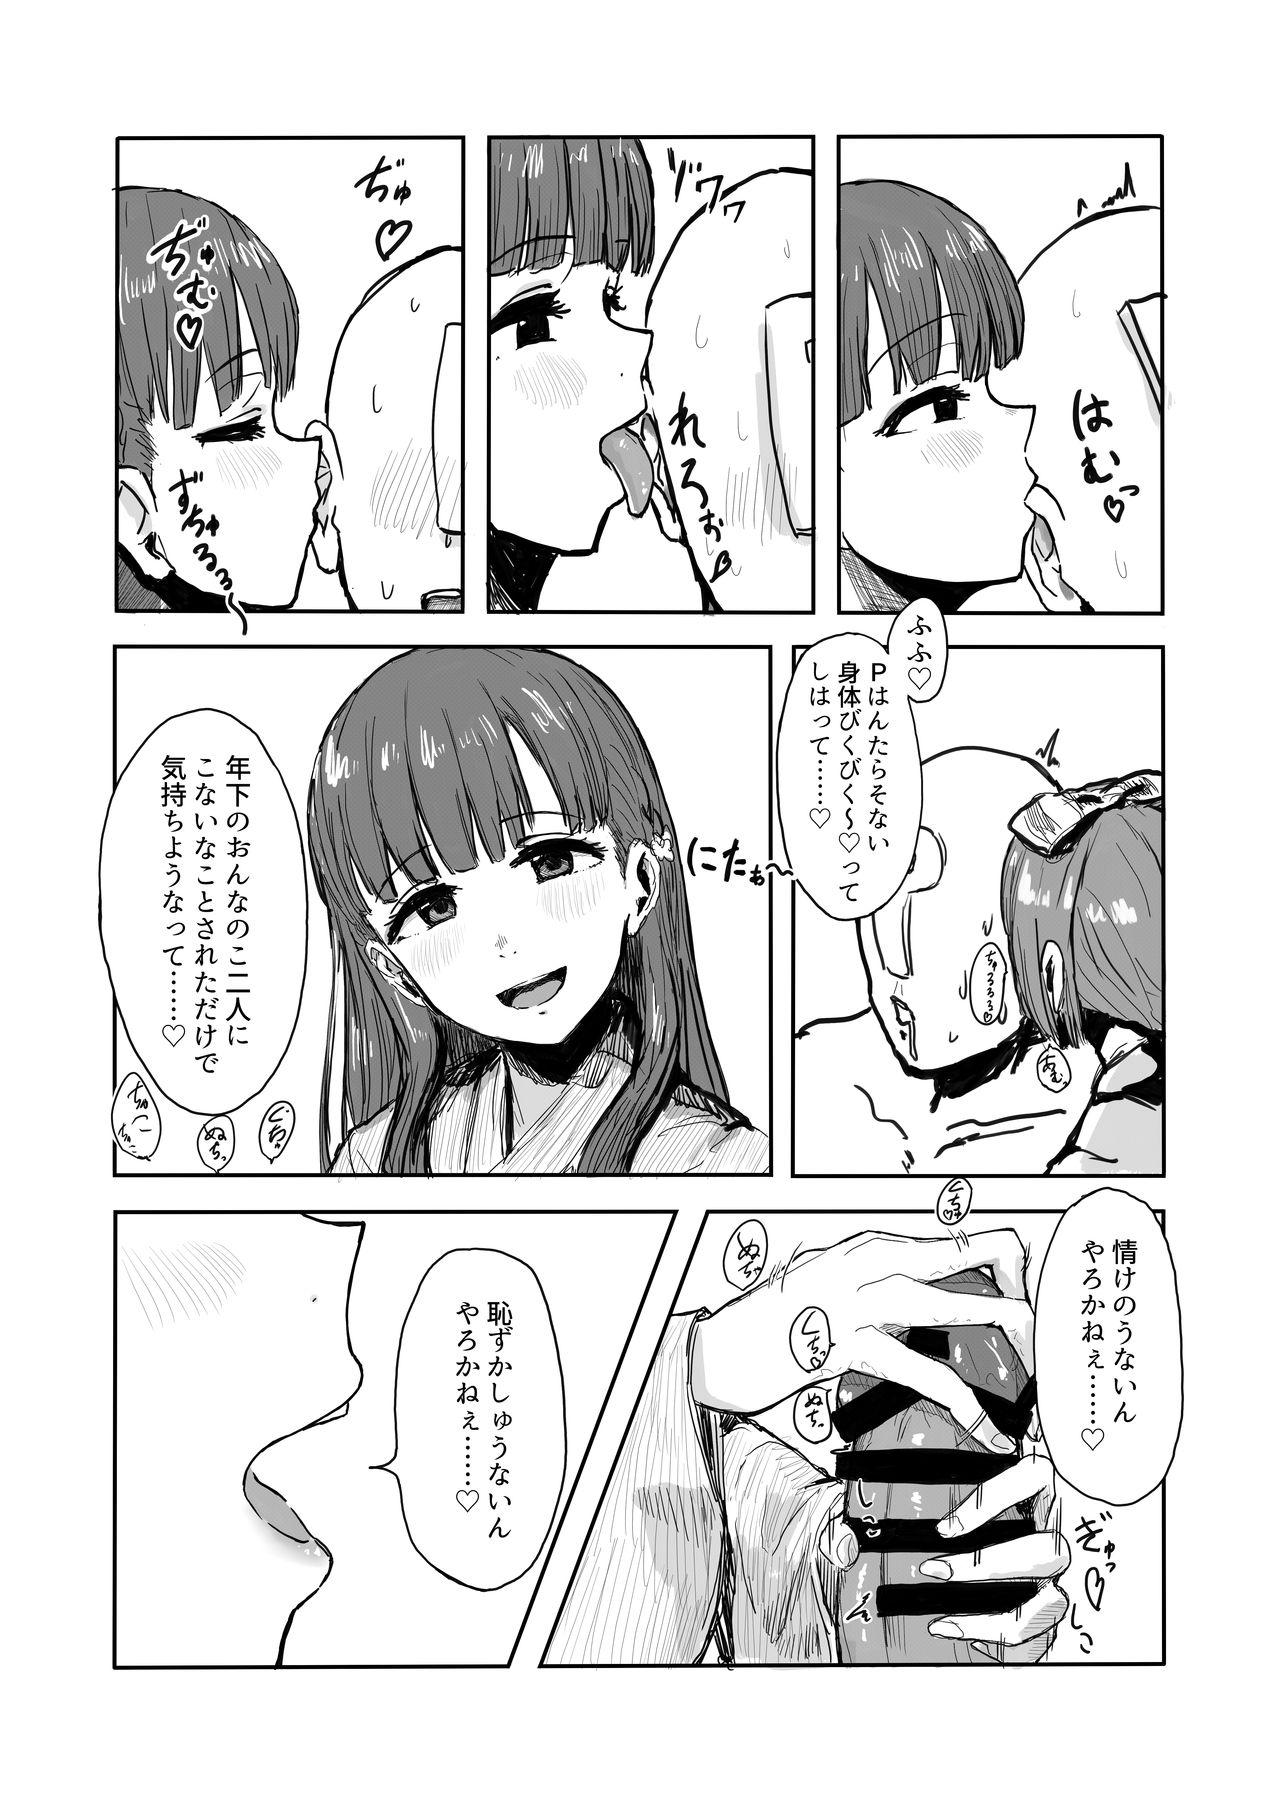 Special Locations 小早川紗枝と依田芳乃のダブル淫語囁き乳首性感耳舐め手コキ - The idolmaster Stepfather - Page 3